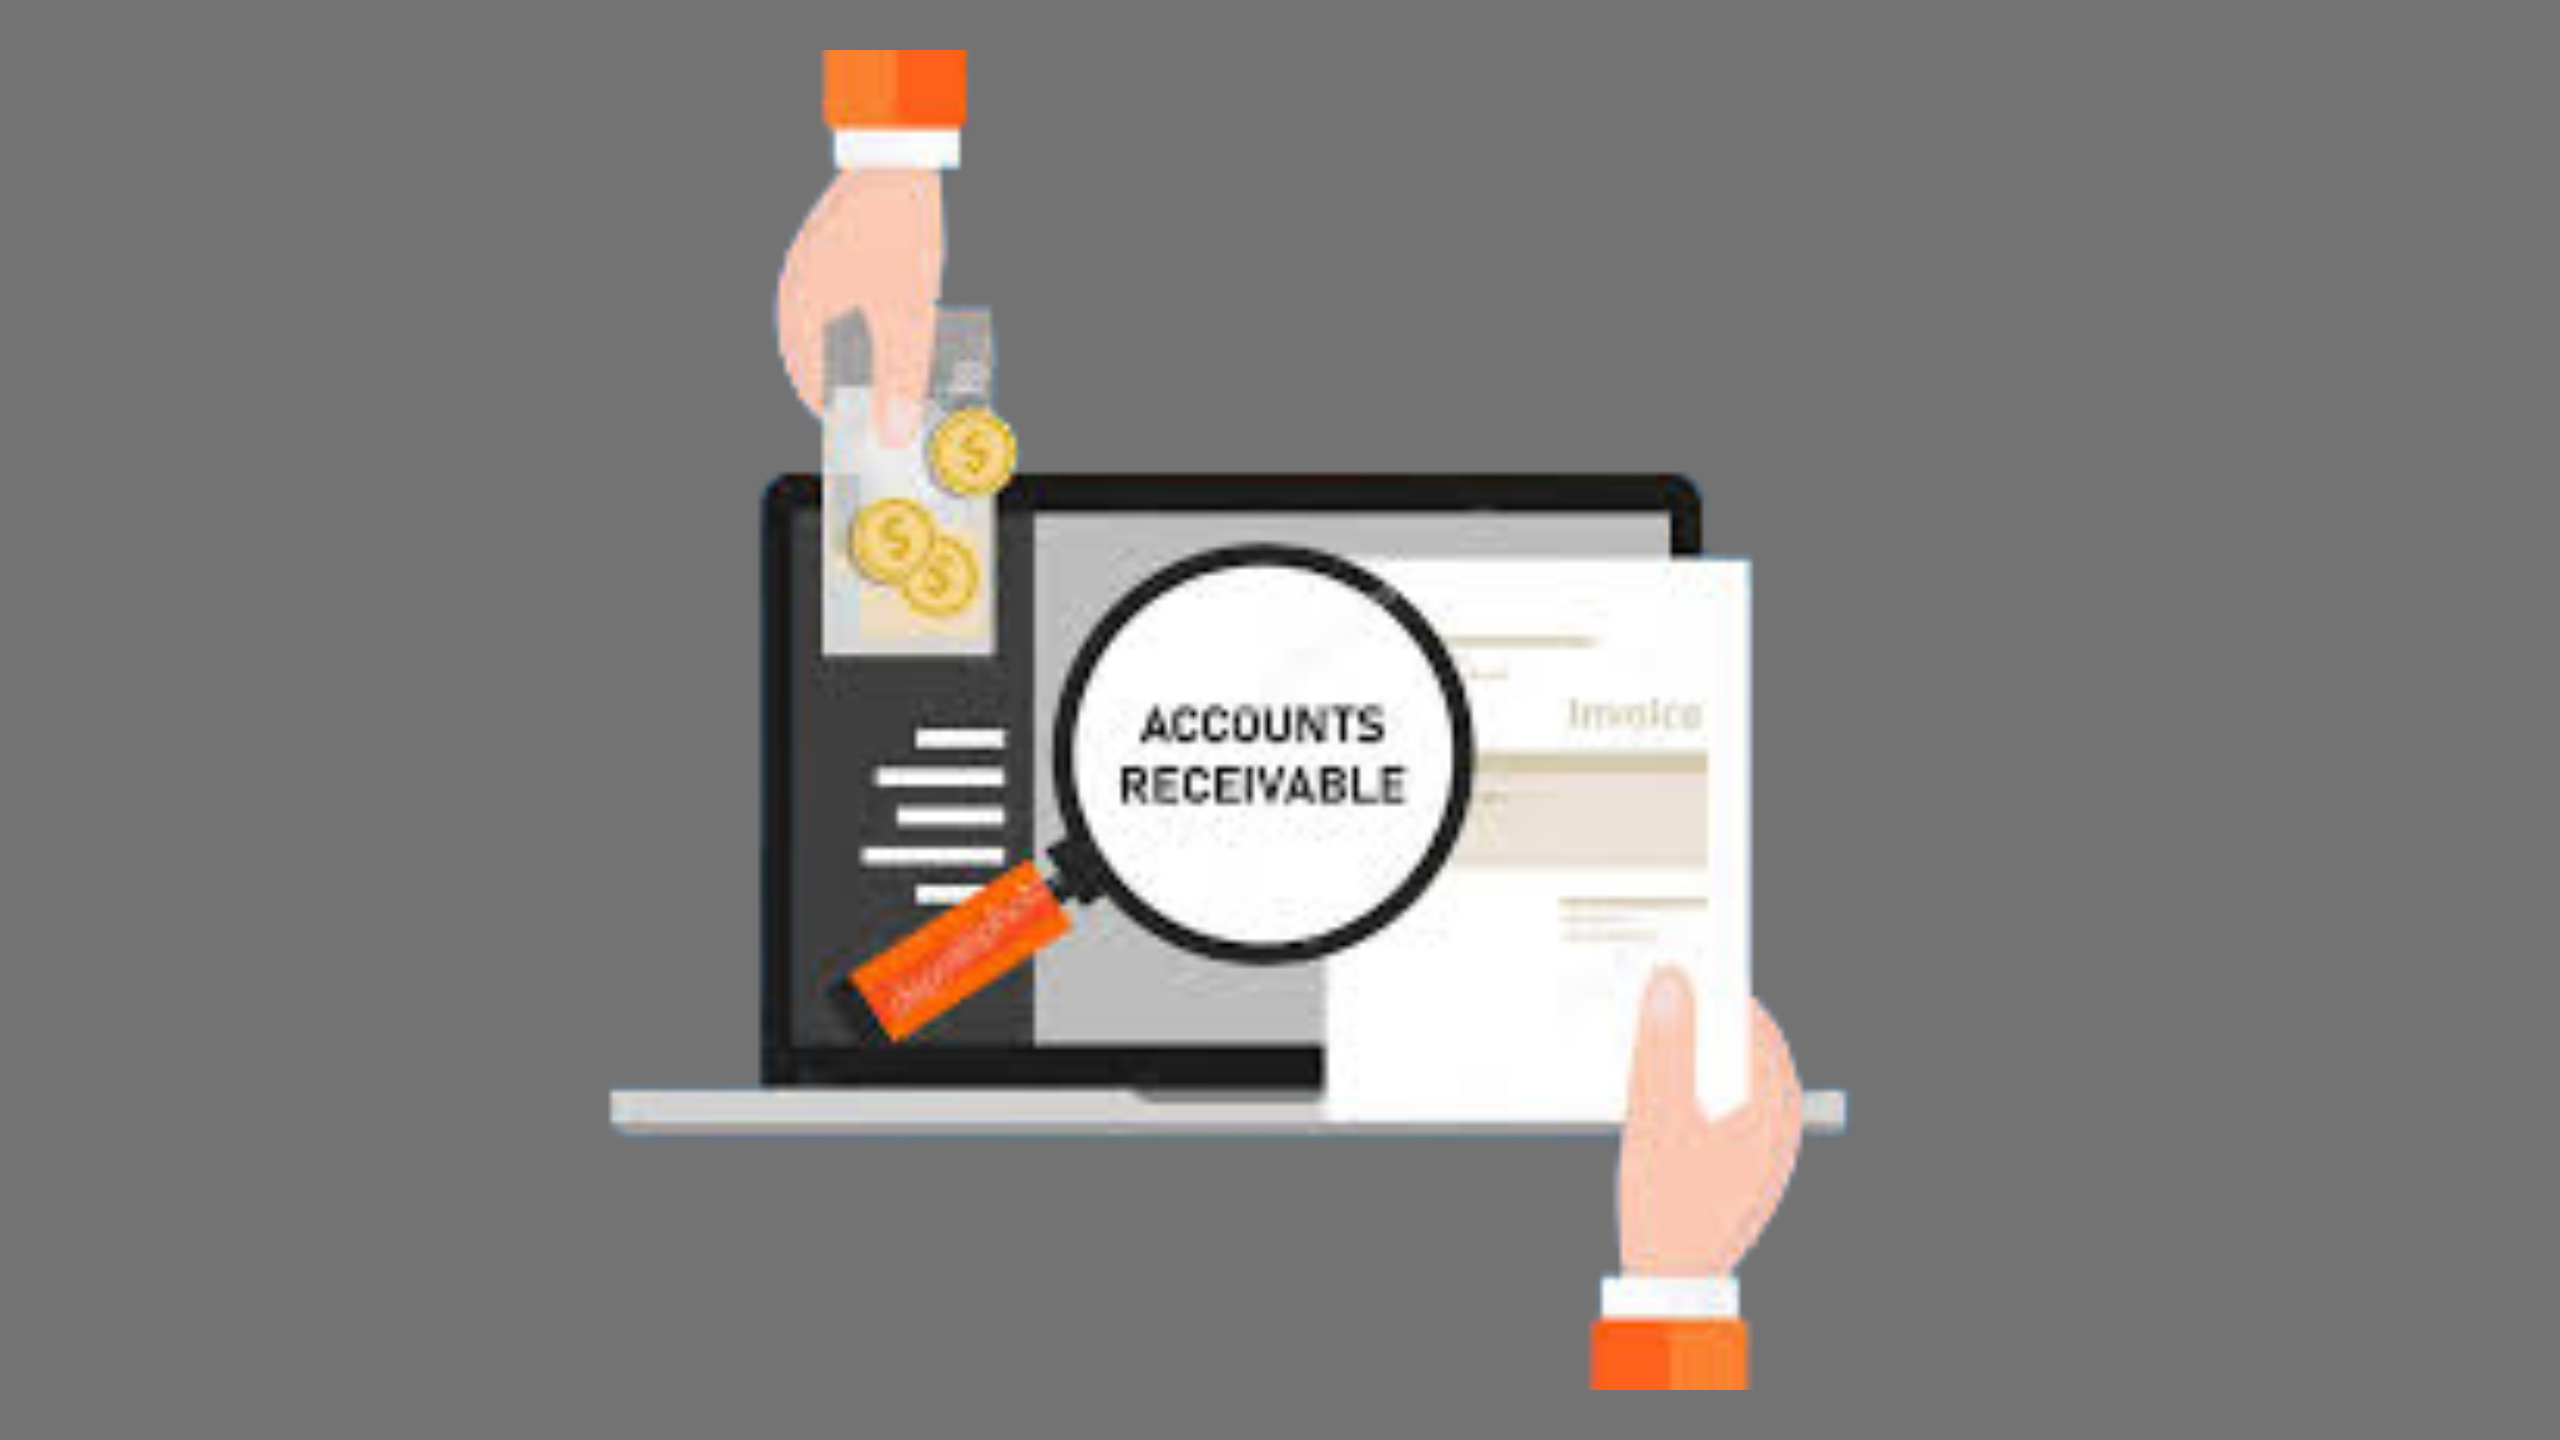 Accounts Receivable (AR) is a key component of a company's balance sheet, representing the amount of money owed to the company